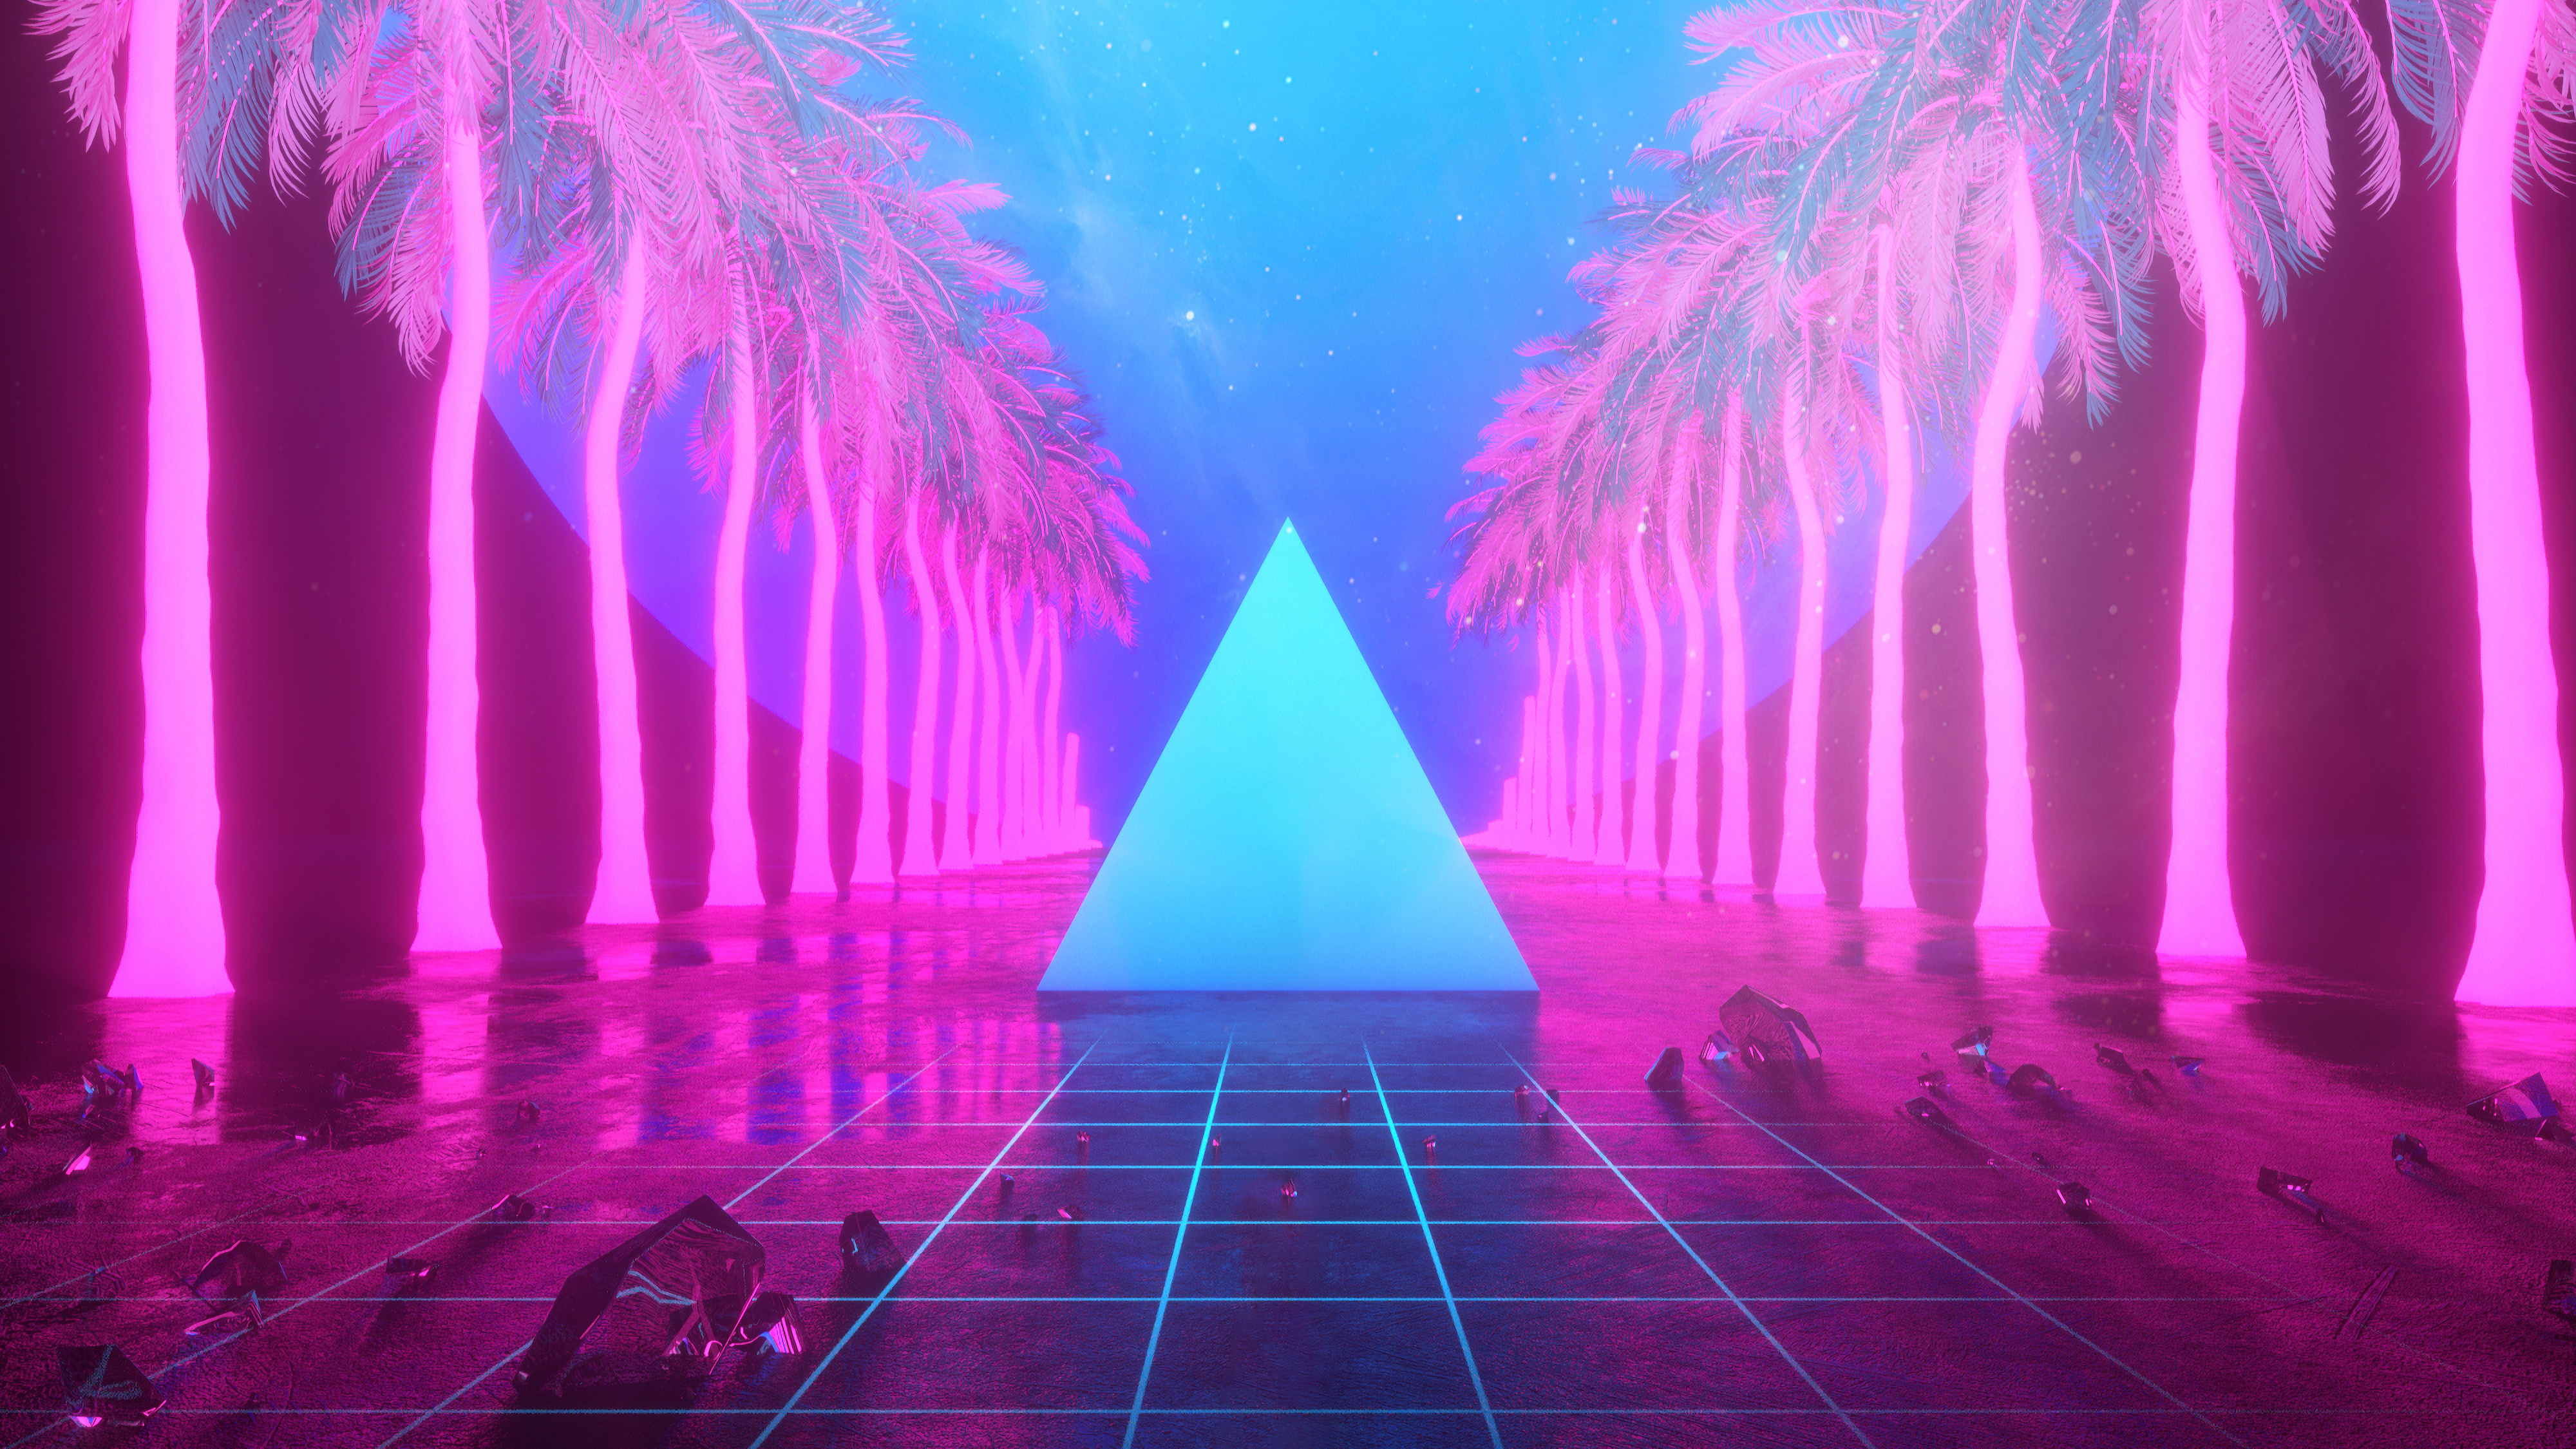 Miami Trees Triangle Neon Artwork 4k, HD Artist, 4k Wallpapers, Images